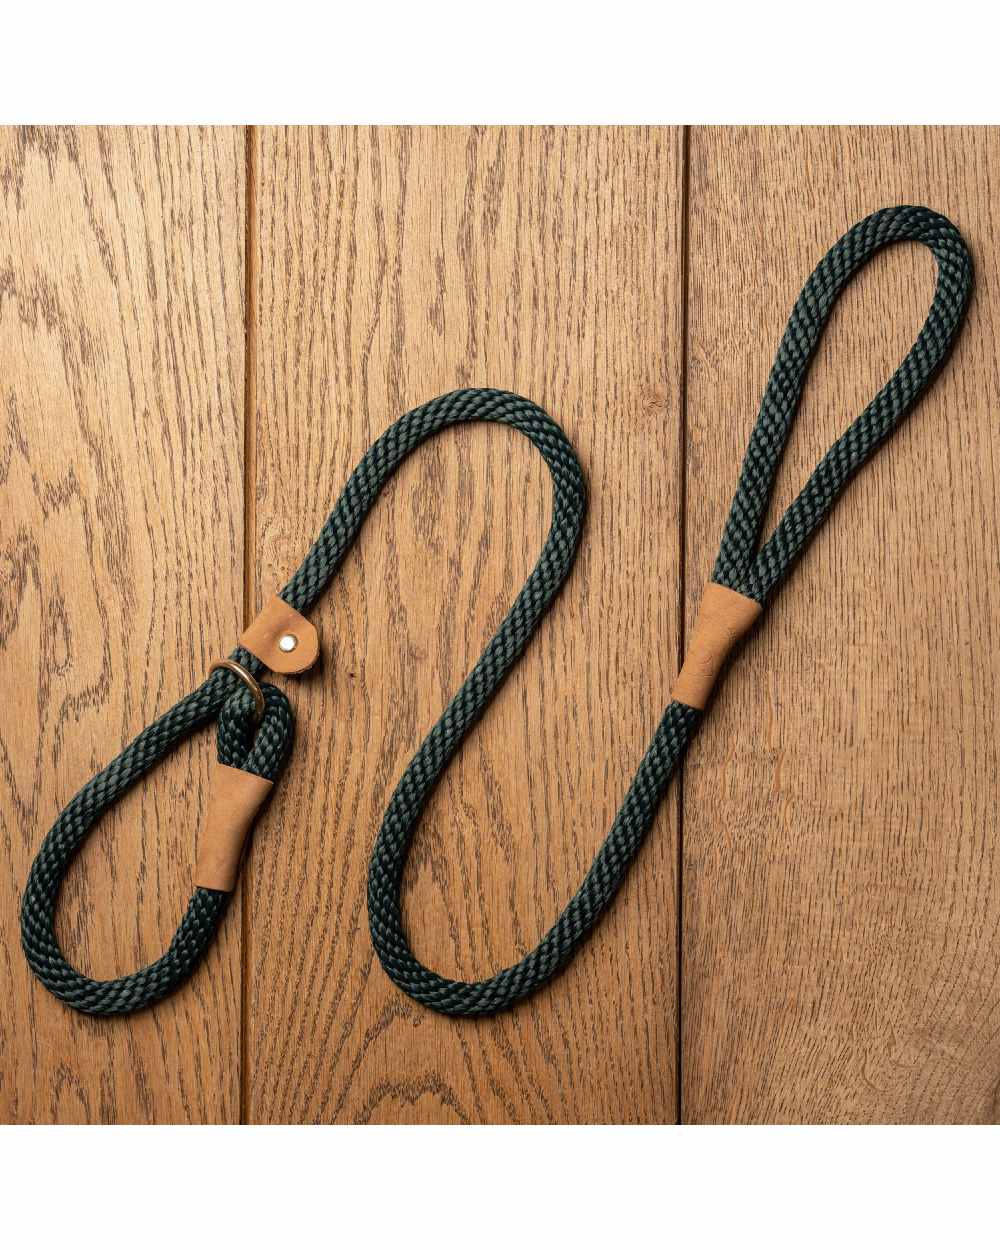 Forest coloured Ruff &amp; Tumble Slip Dog Leads on wooden background 